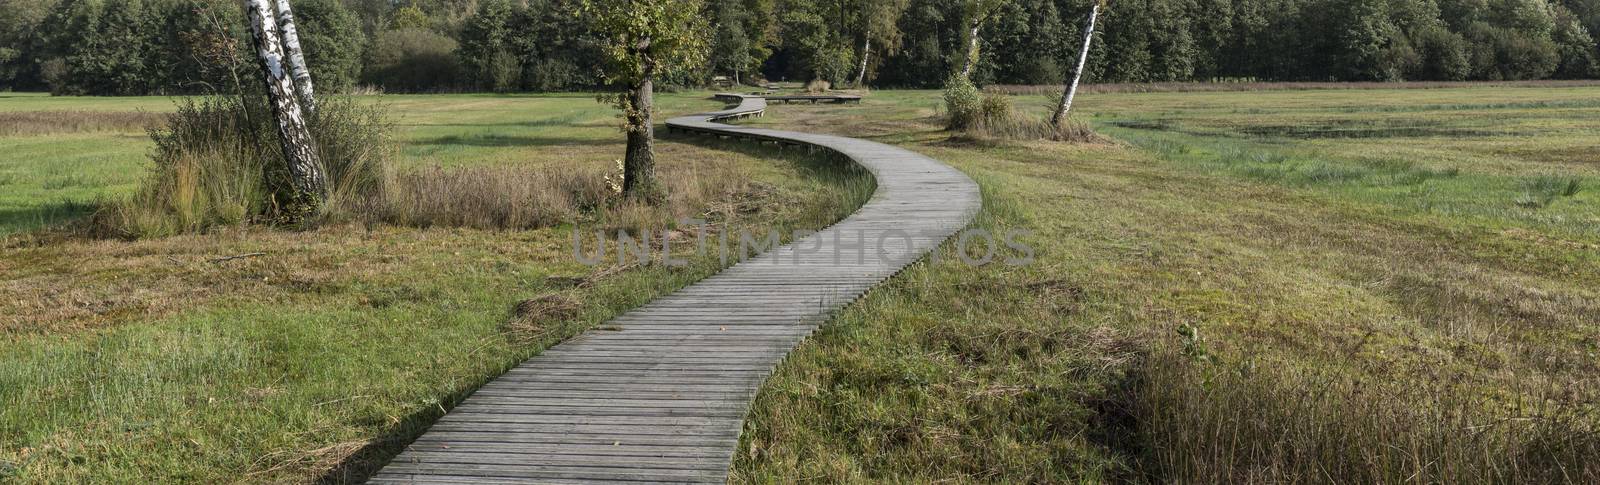 a winding wooden hiking trail  by compuinfoto